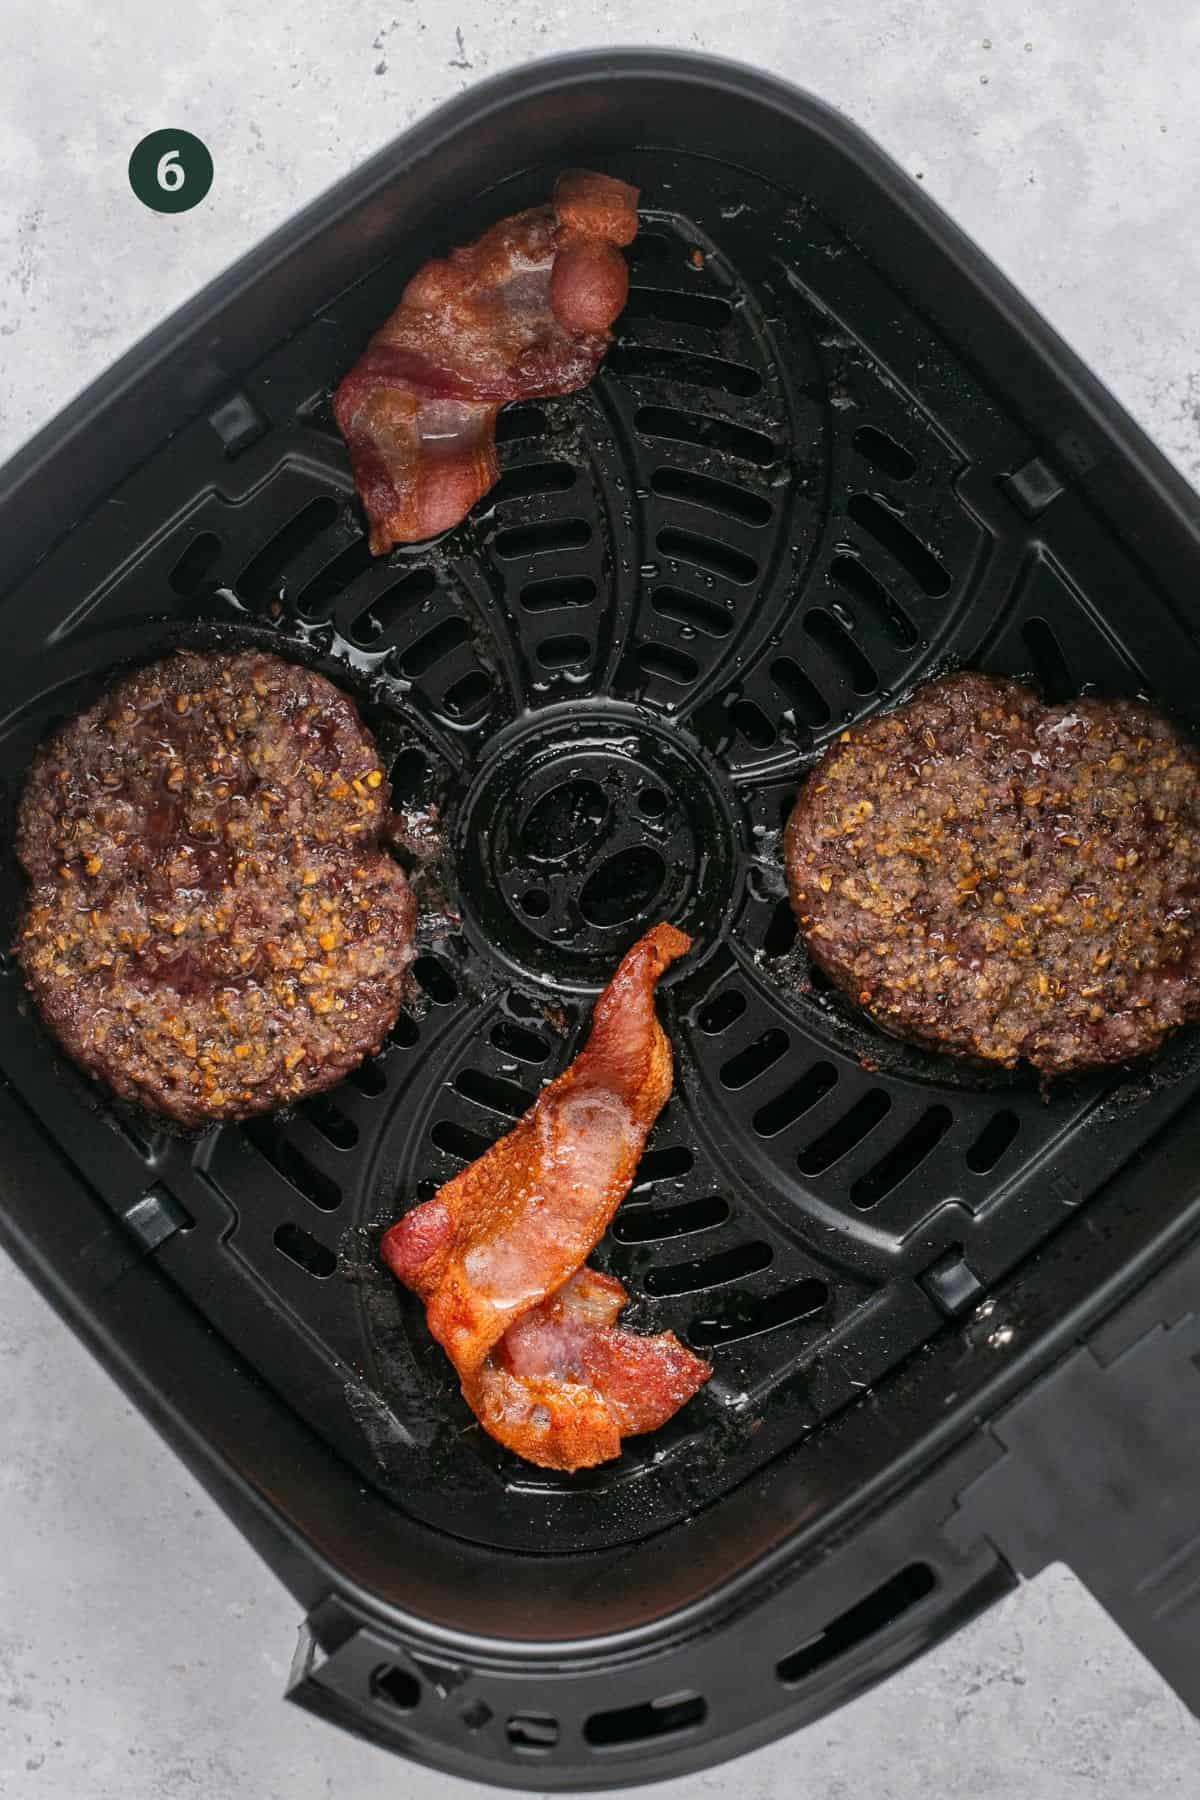 Cooked burgers and bacon in the air fryer basket. 